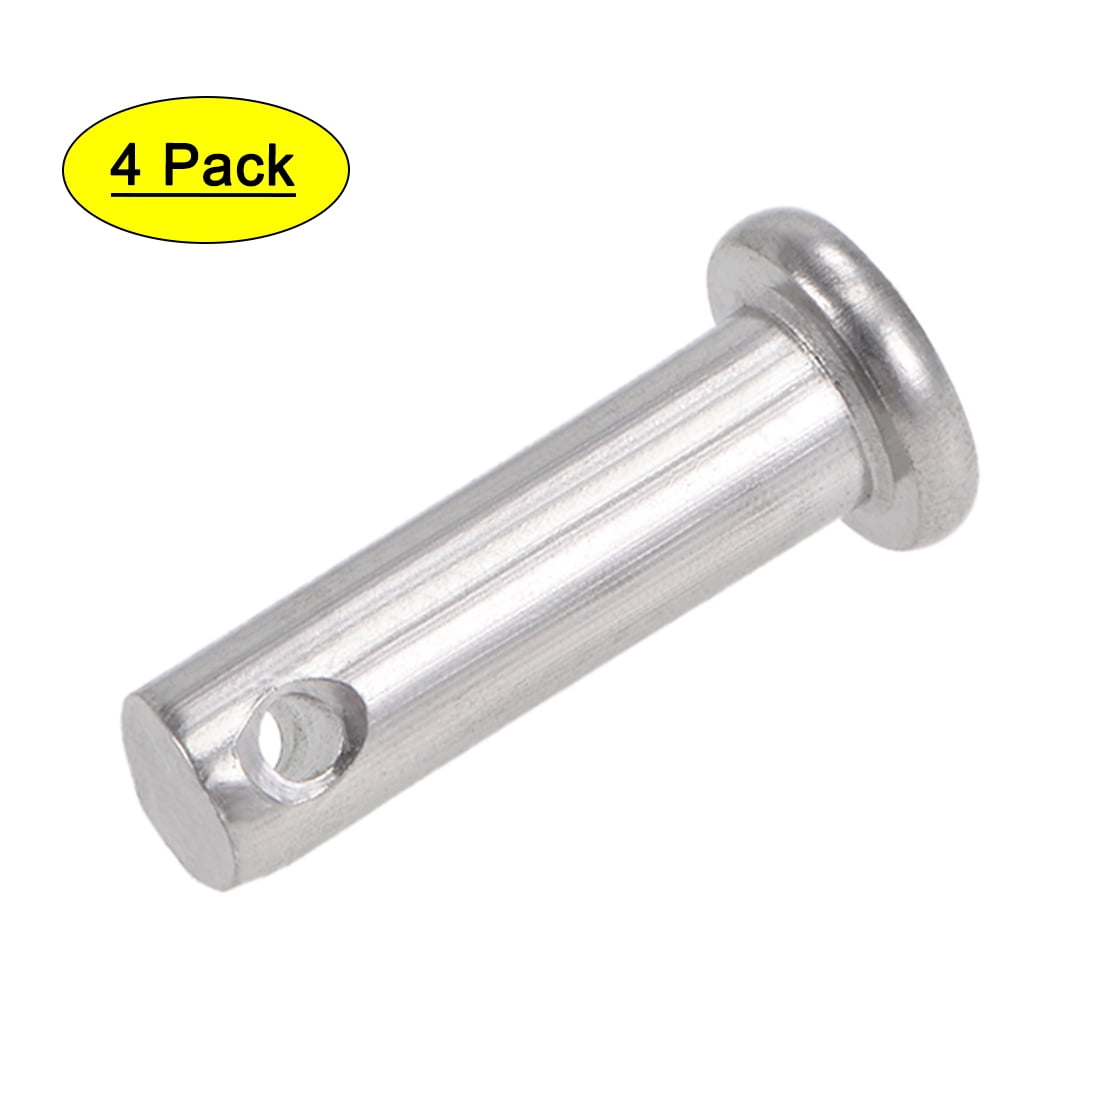 6mm x 20mm Flat Head 304 Stainless Steel Pin 4Pcs Single Hole Clevis Pins 